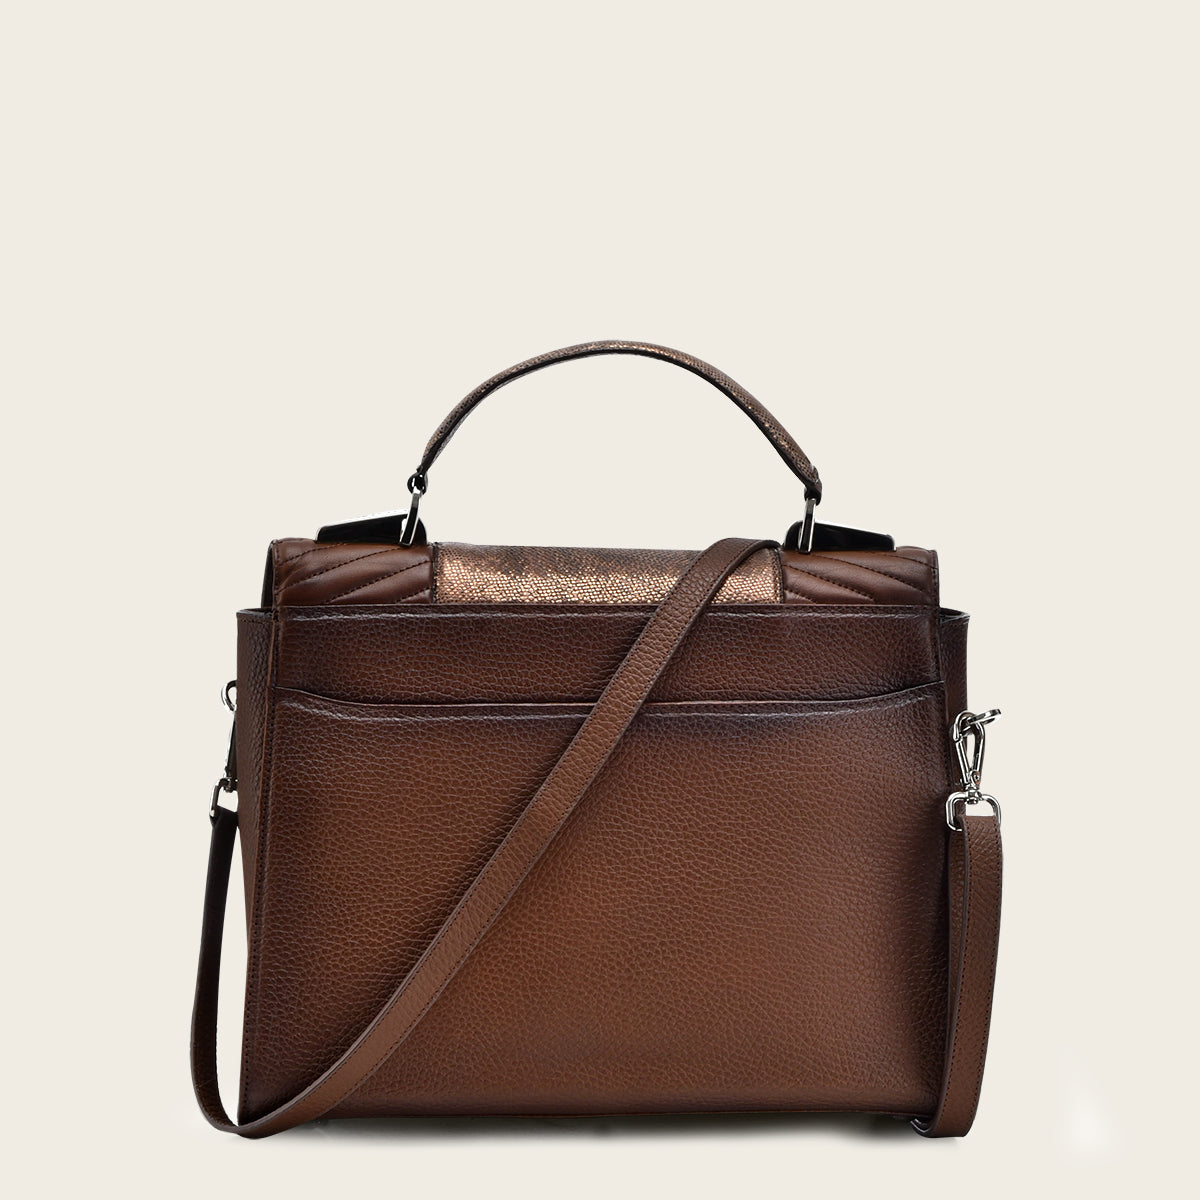 Modern Honey brown handbag with exotic leather detail